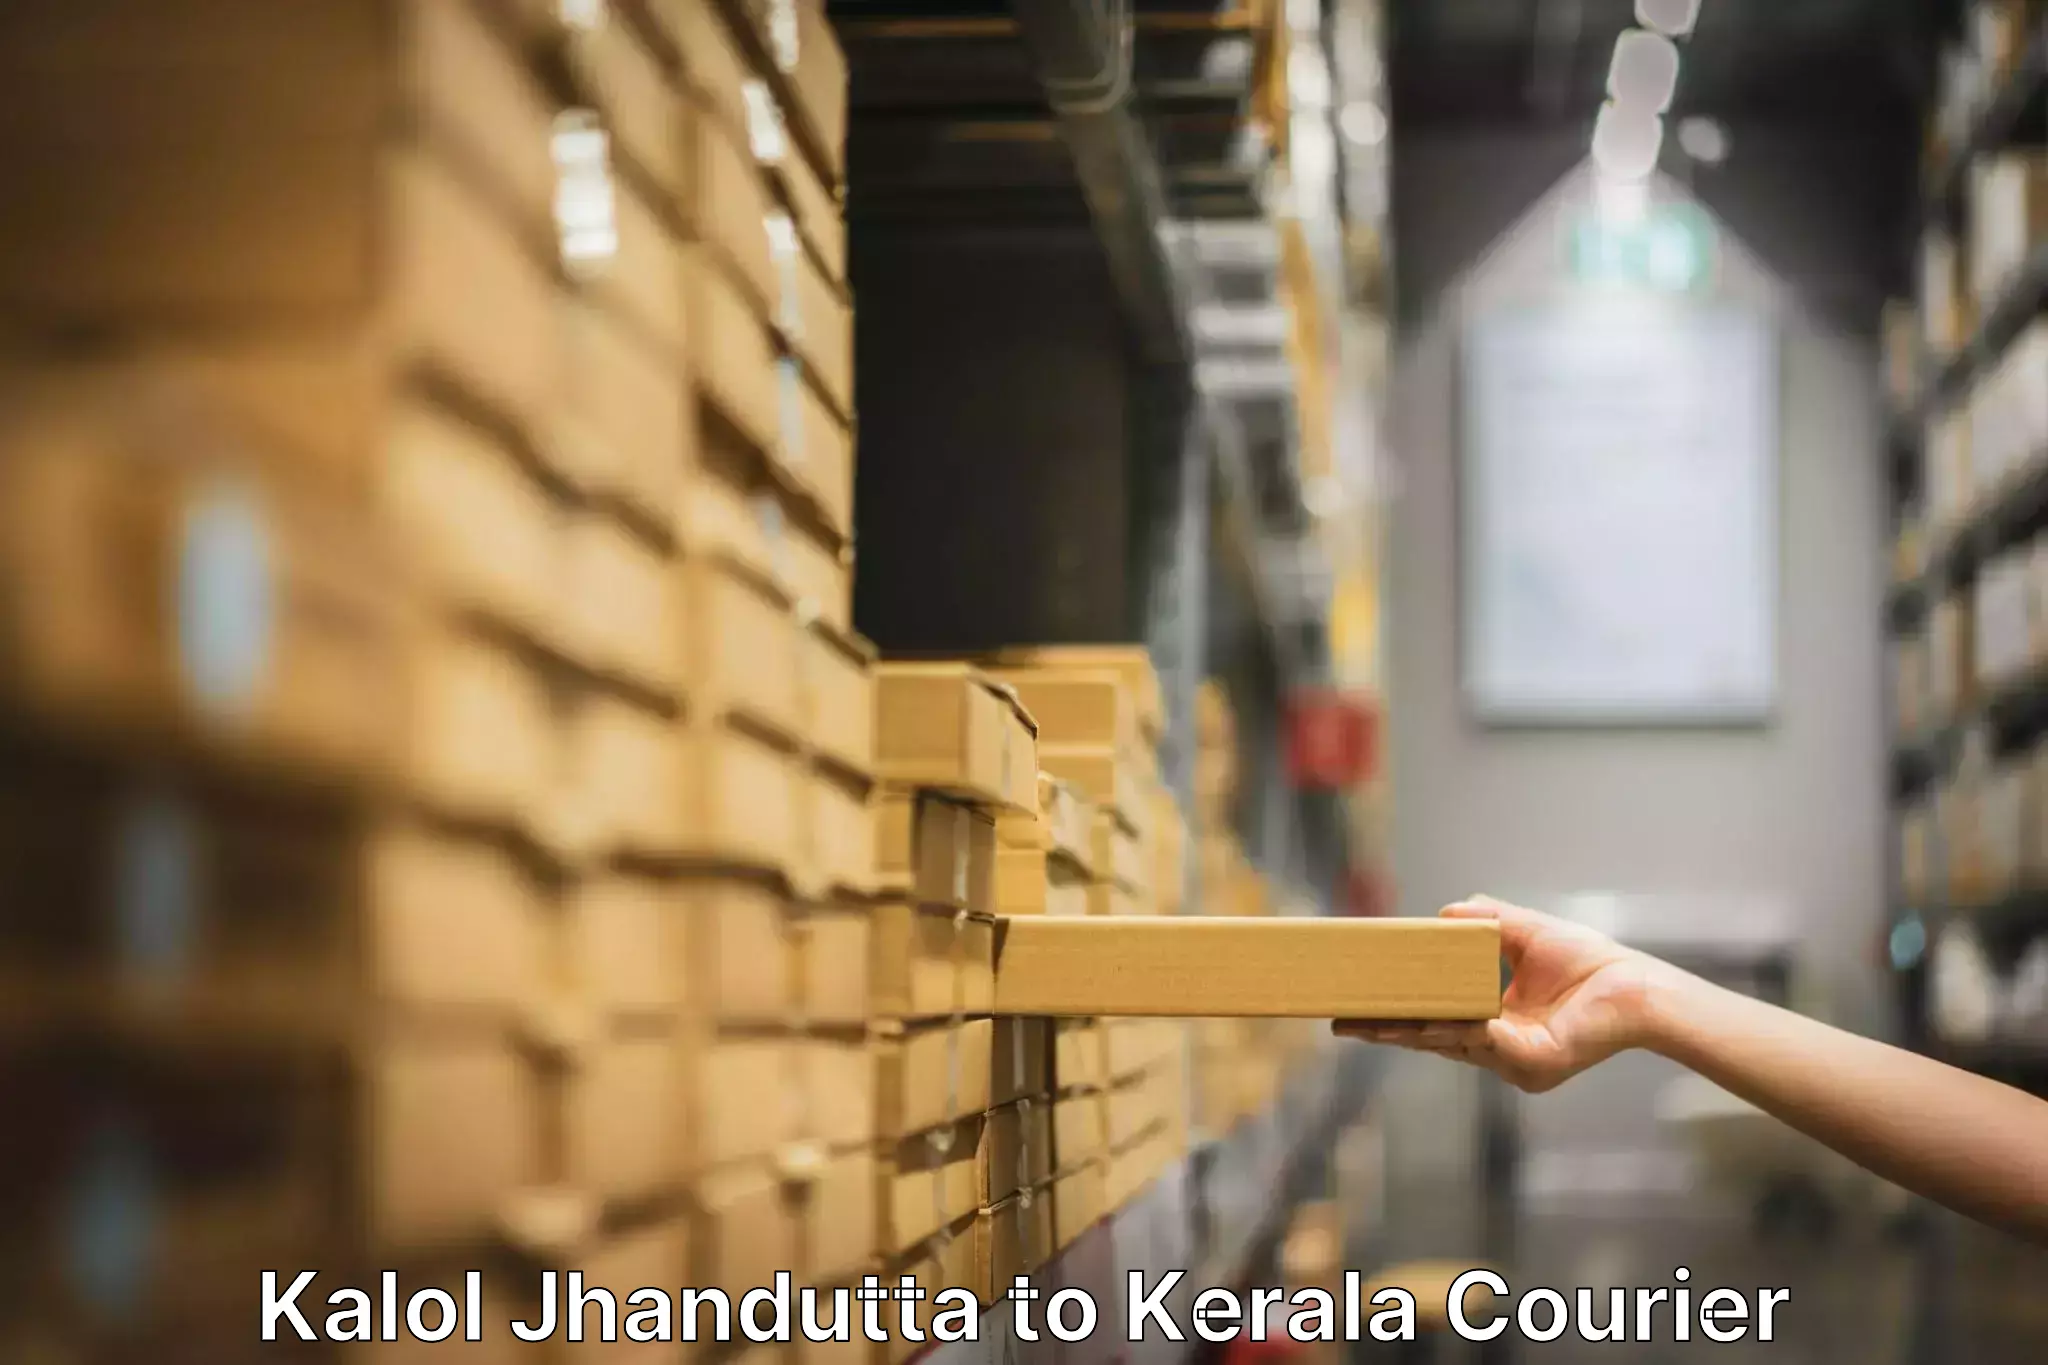 Efficient furniture relocation Kalol Jhandutta to Cochin University of Science and Technology